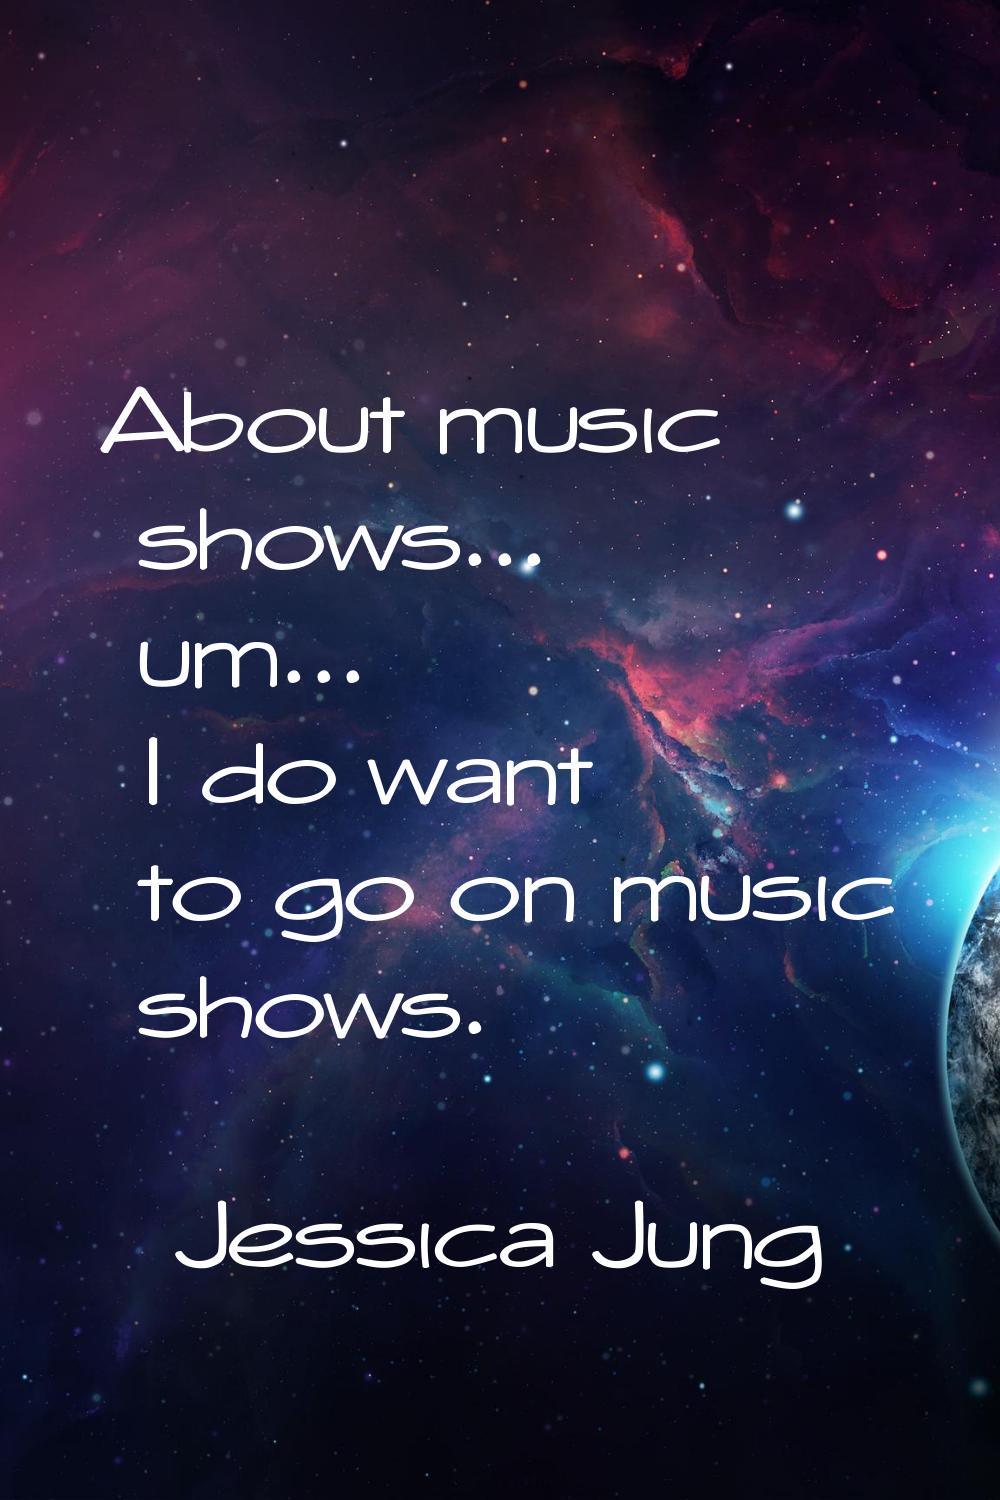 About music shows... um... I do want to go on music shows.